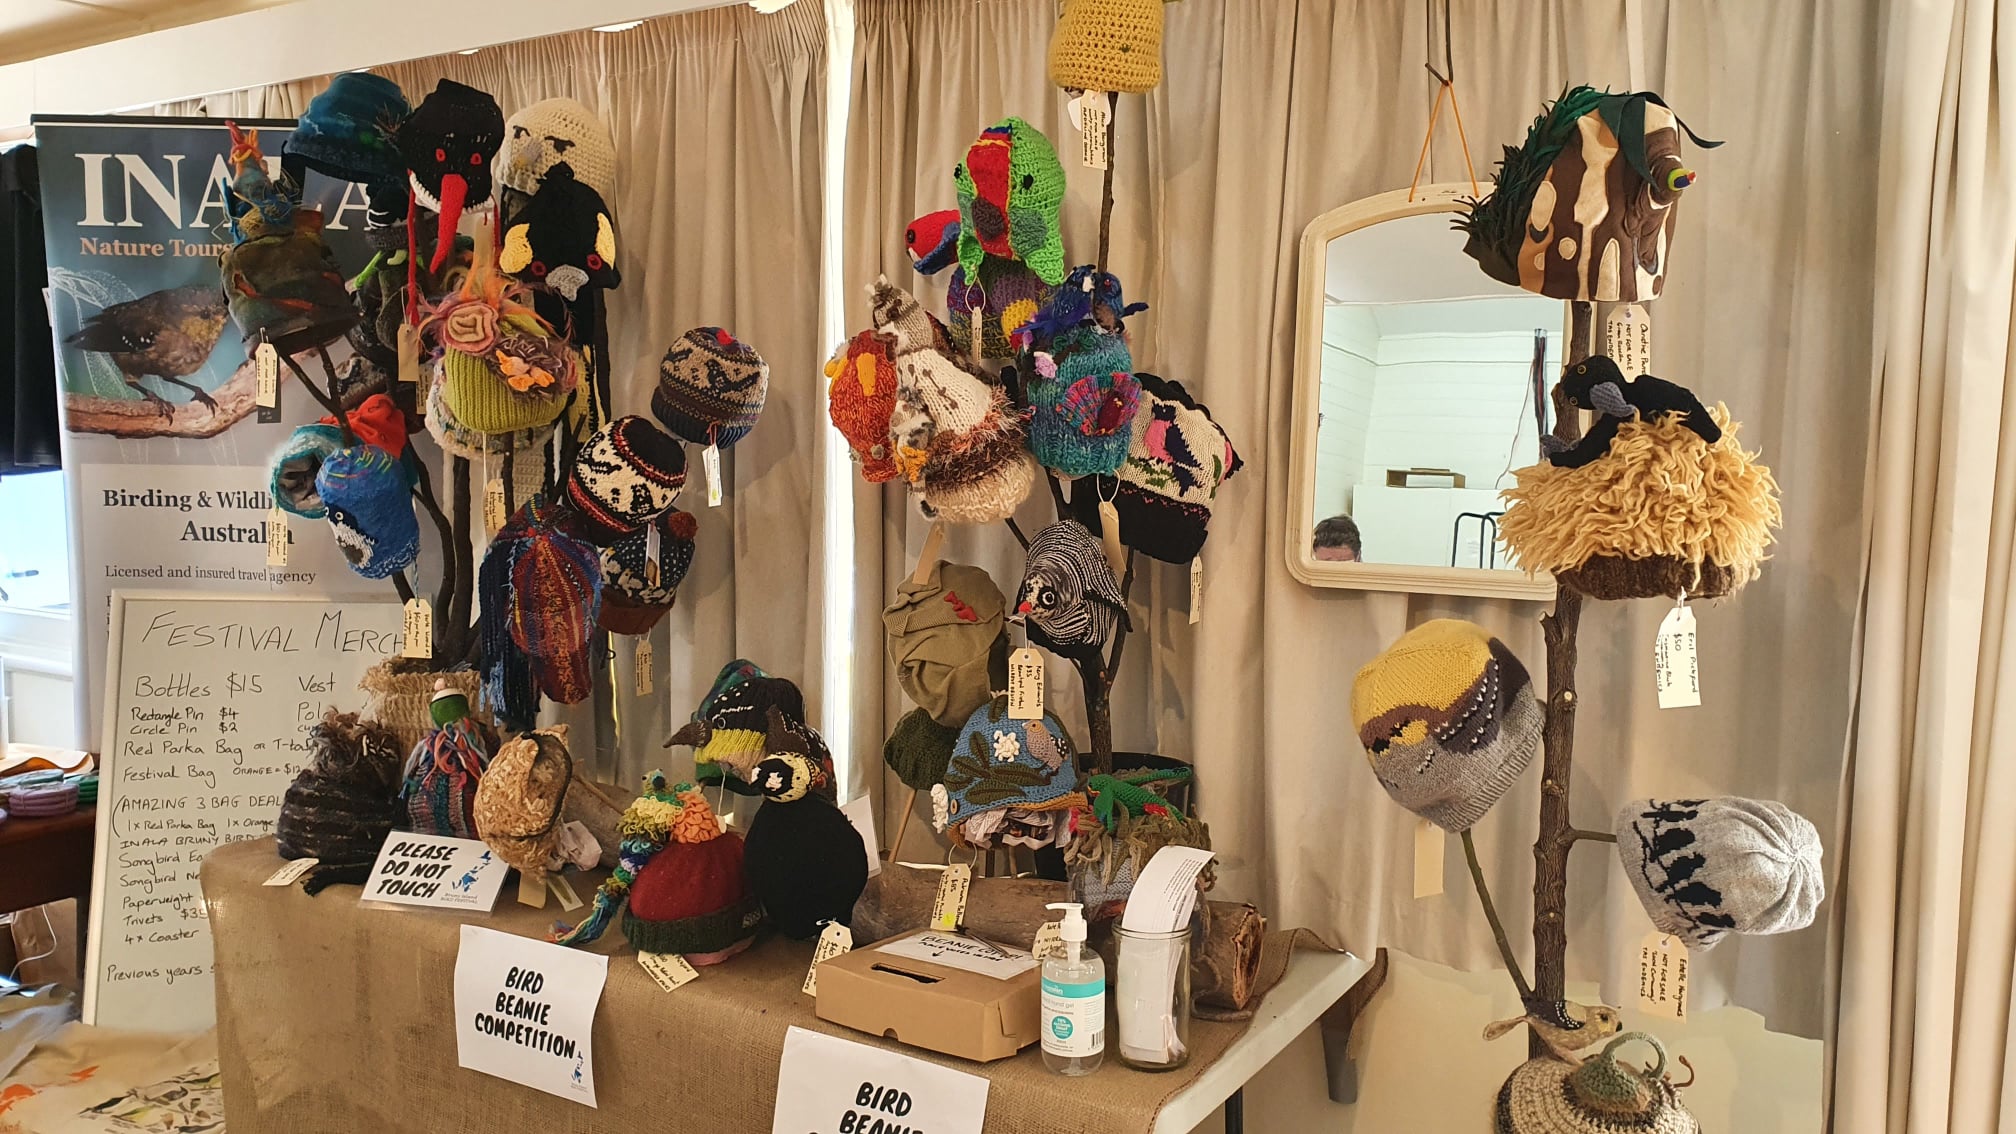 Bird beanie competition at the Bruny Island Bird festival Profile story with Art Trails Tasmania